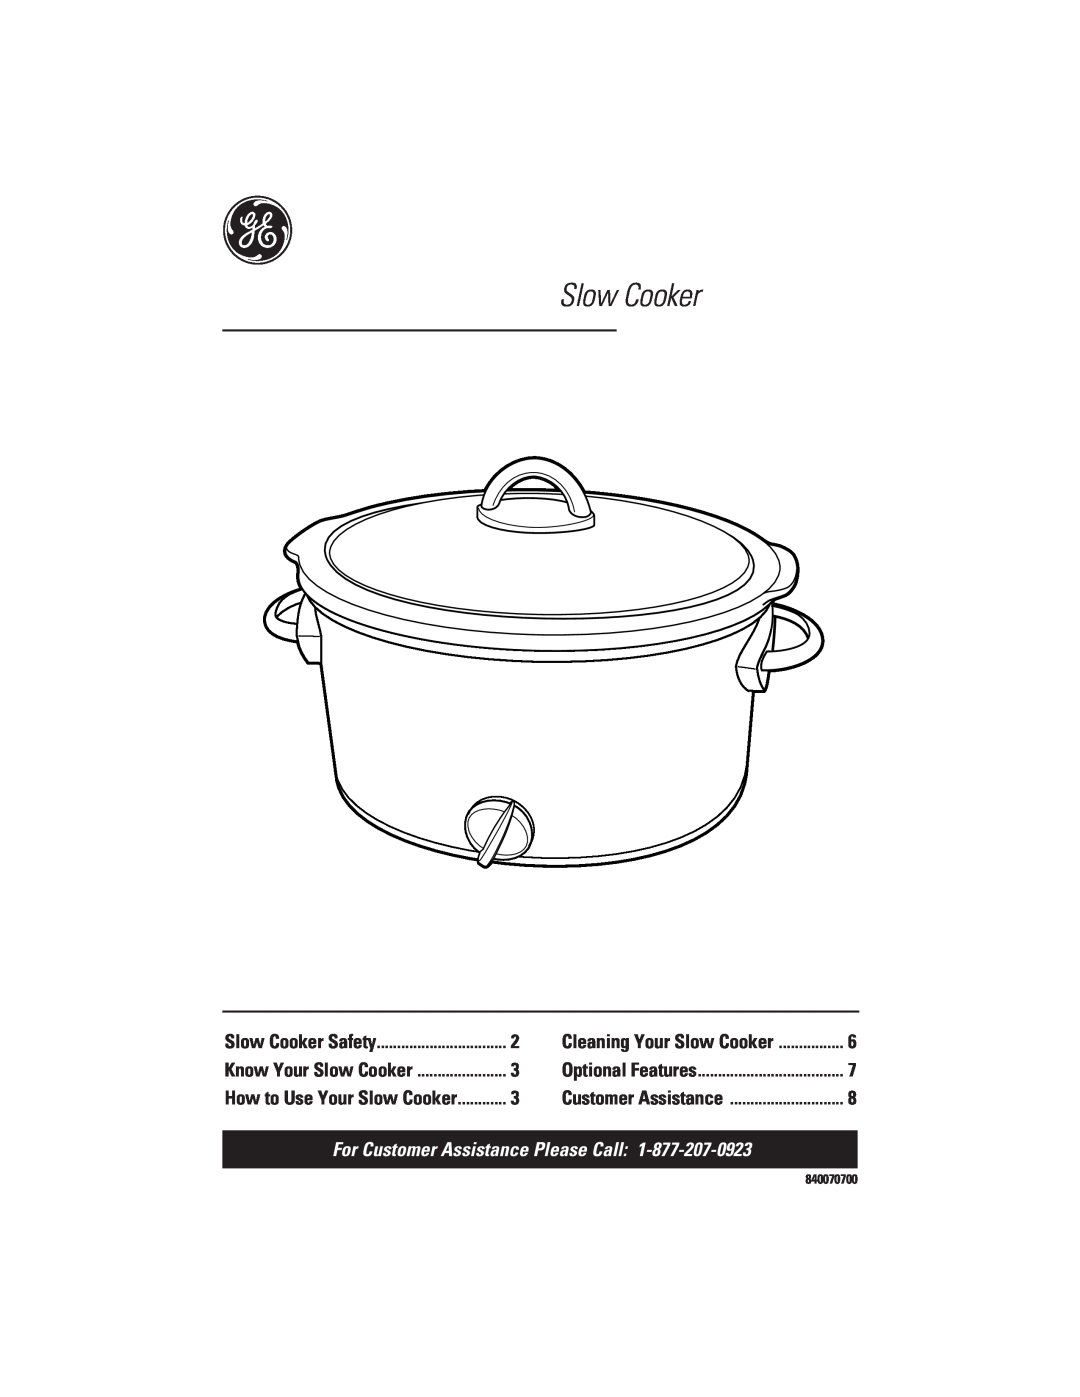 GE 840070700 manual For Customer Assistance Please Call, Slow Cooker Safety, Cleaning Your Slow Cooker 